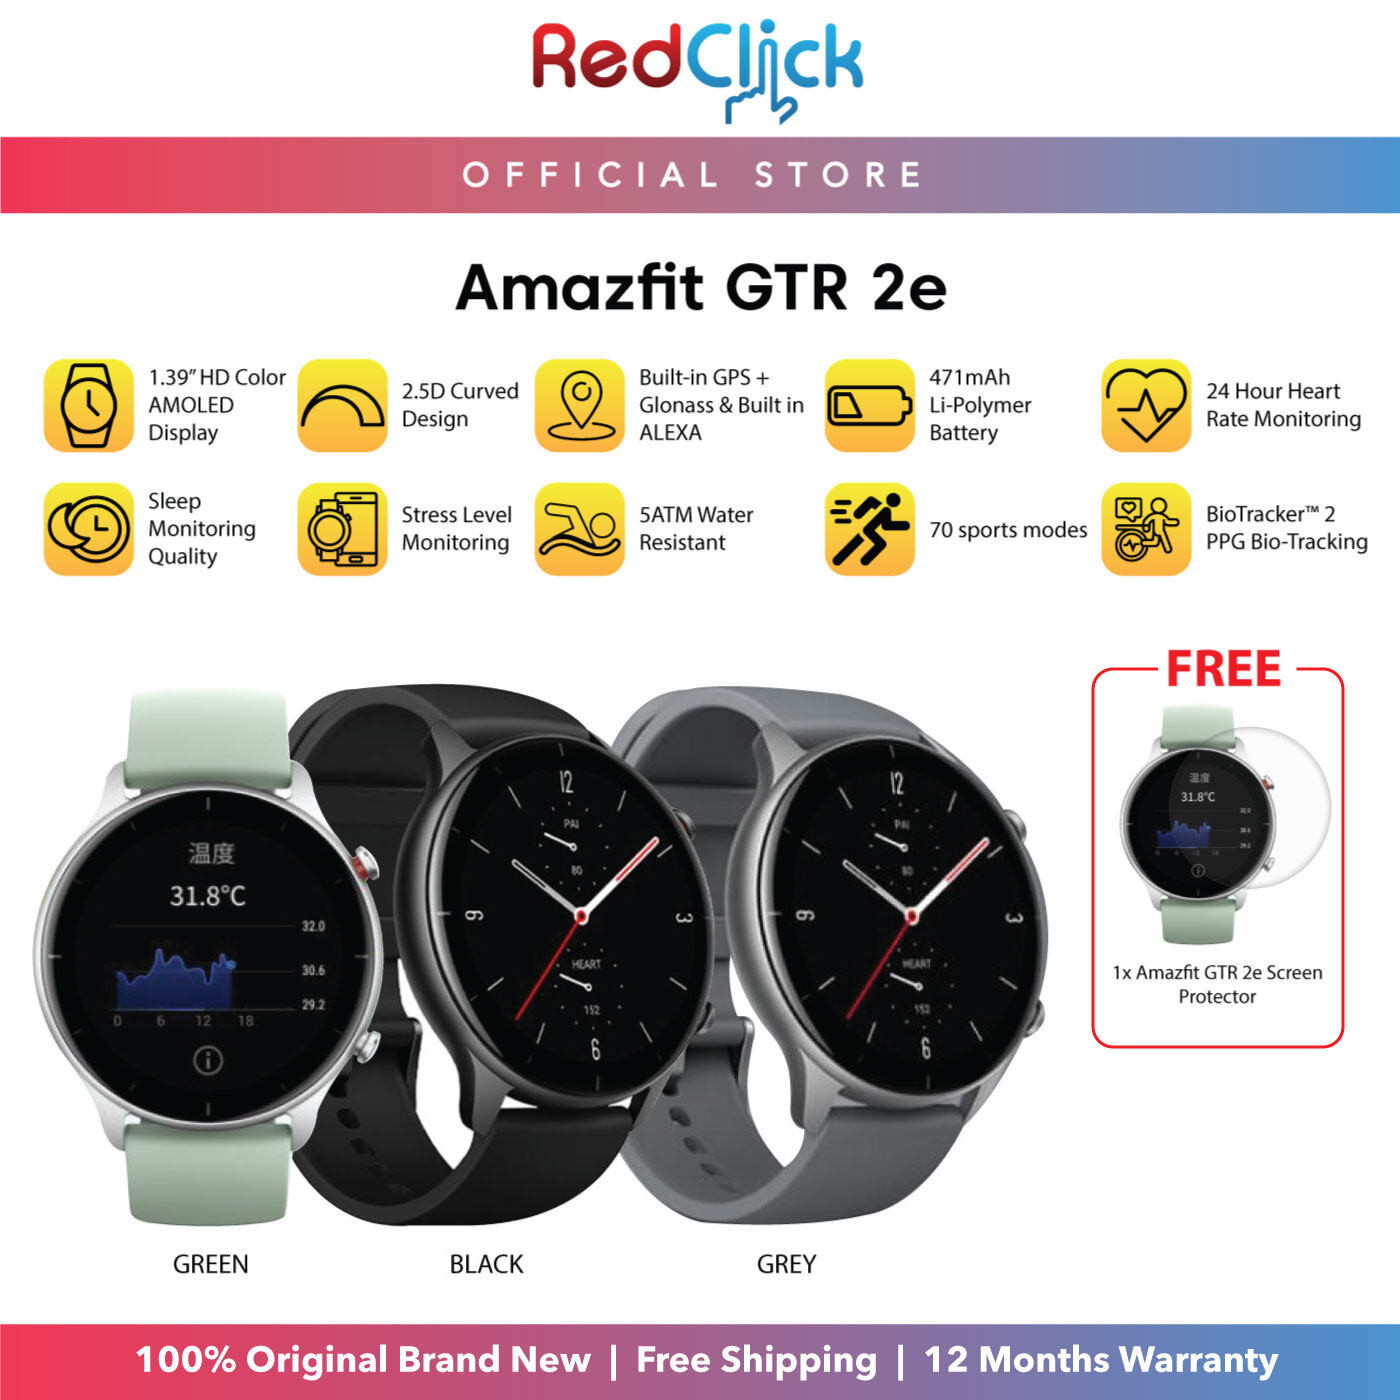 (Official Amazfit) Amazfit GTR 2e A2023 1.39" AMOLED Always On Display 2.5D  24 Hour Heart Rate monitoring Ultra-Long Battery Life + 3 Free Gift